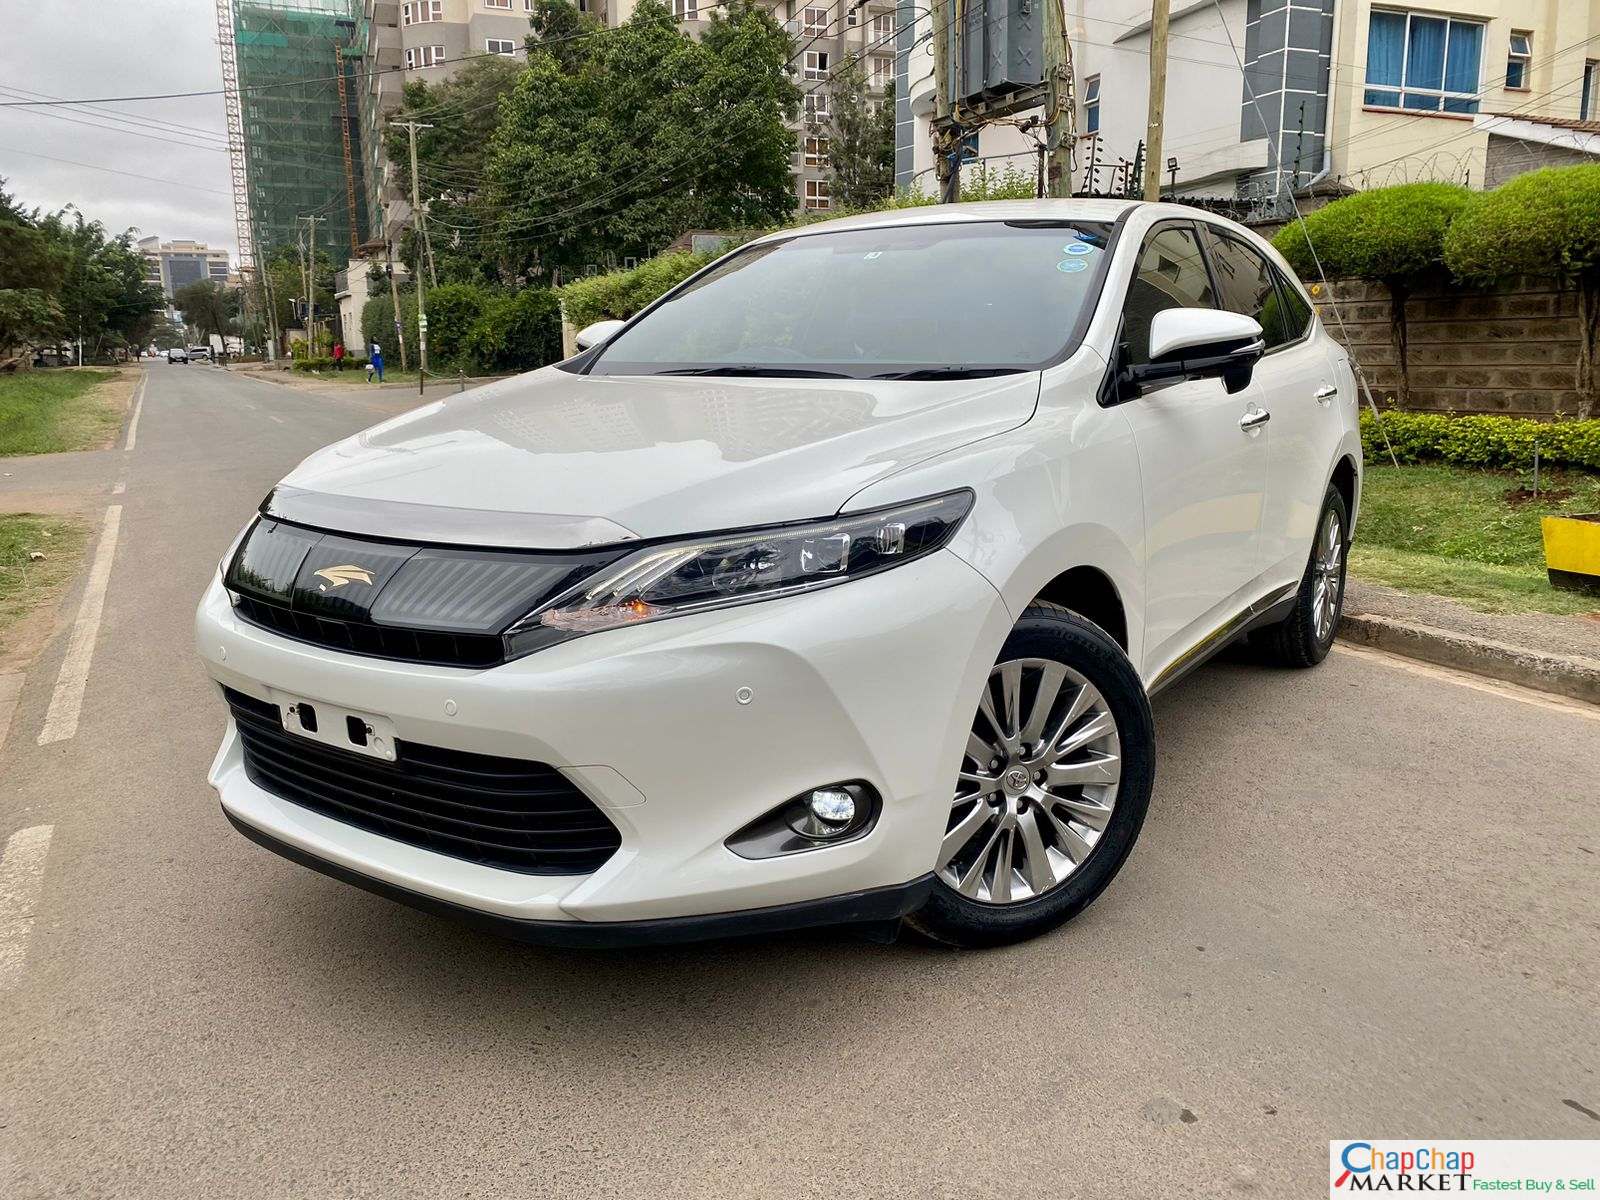 Toyota Harrier for Sale in Kenya Just Arrived Hire Purchase Installments Trade in OK EXCLUSIVE